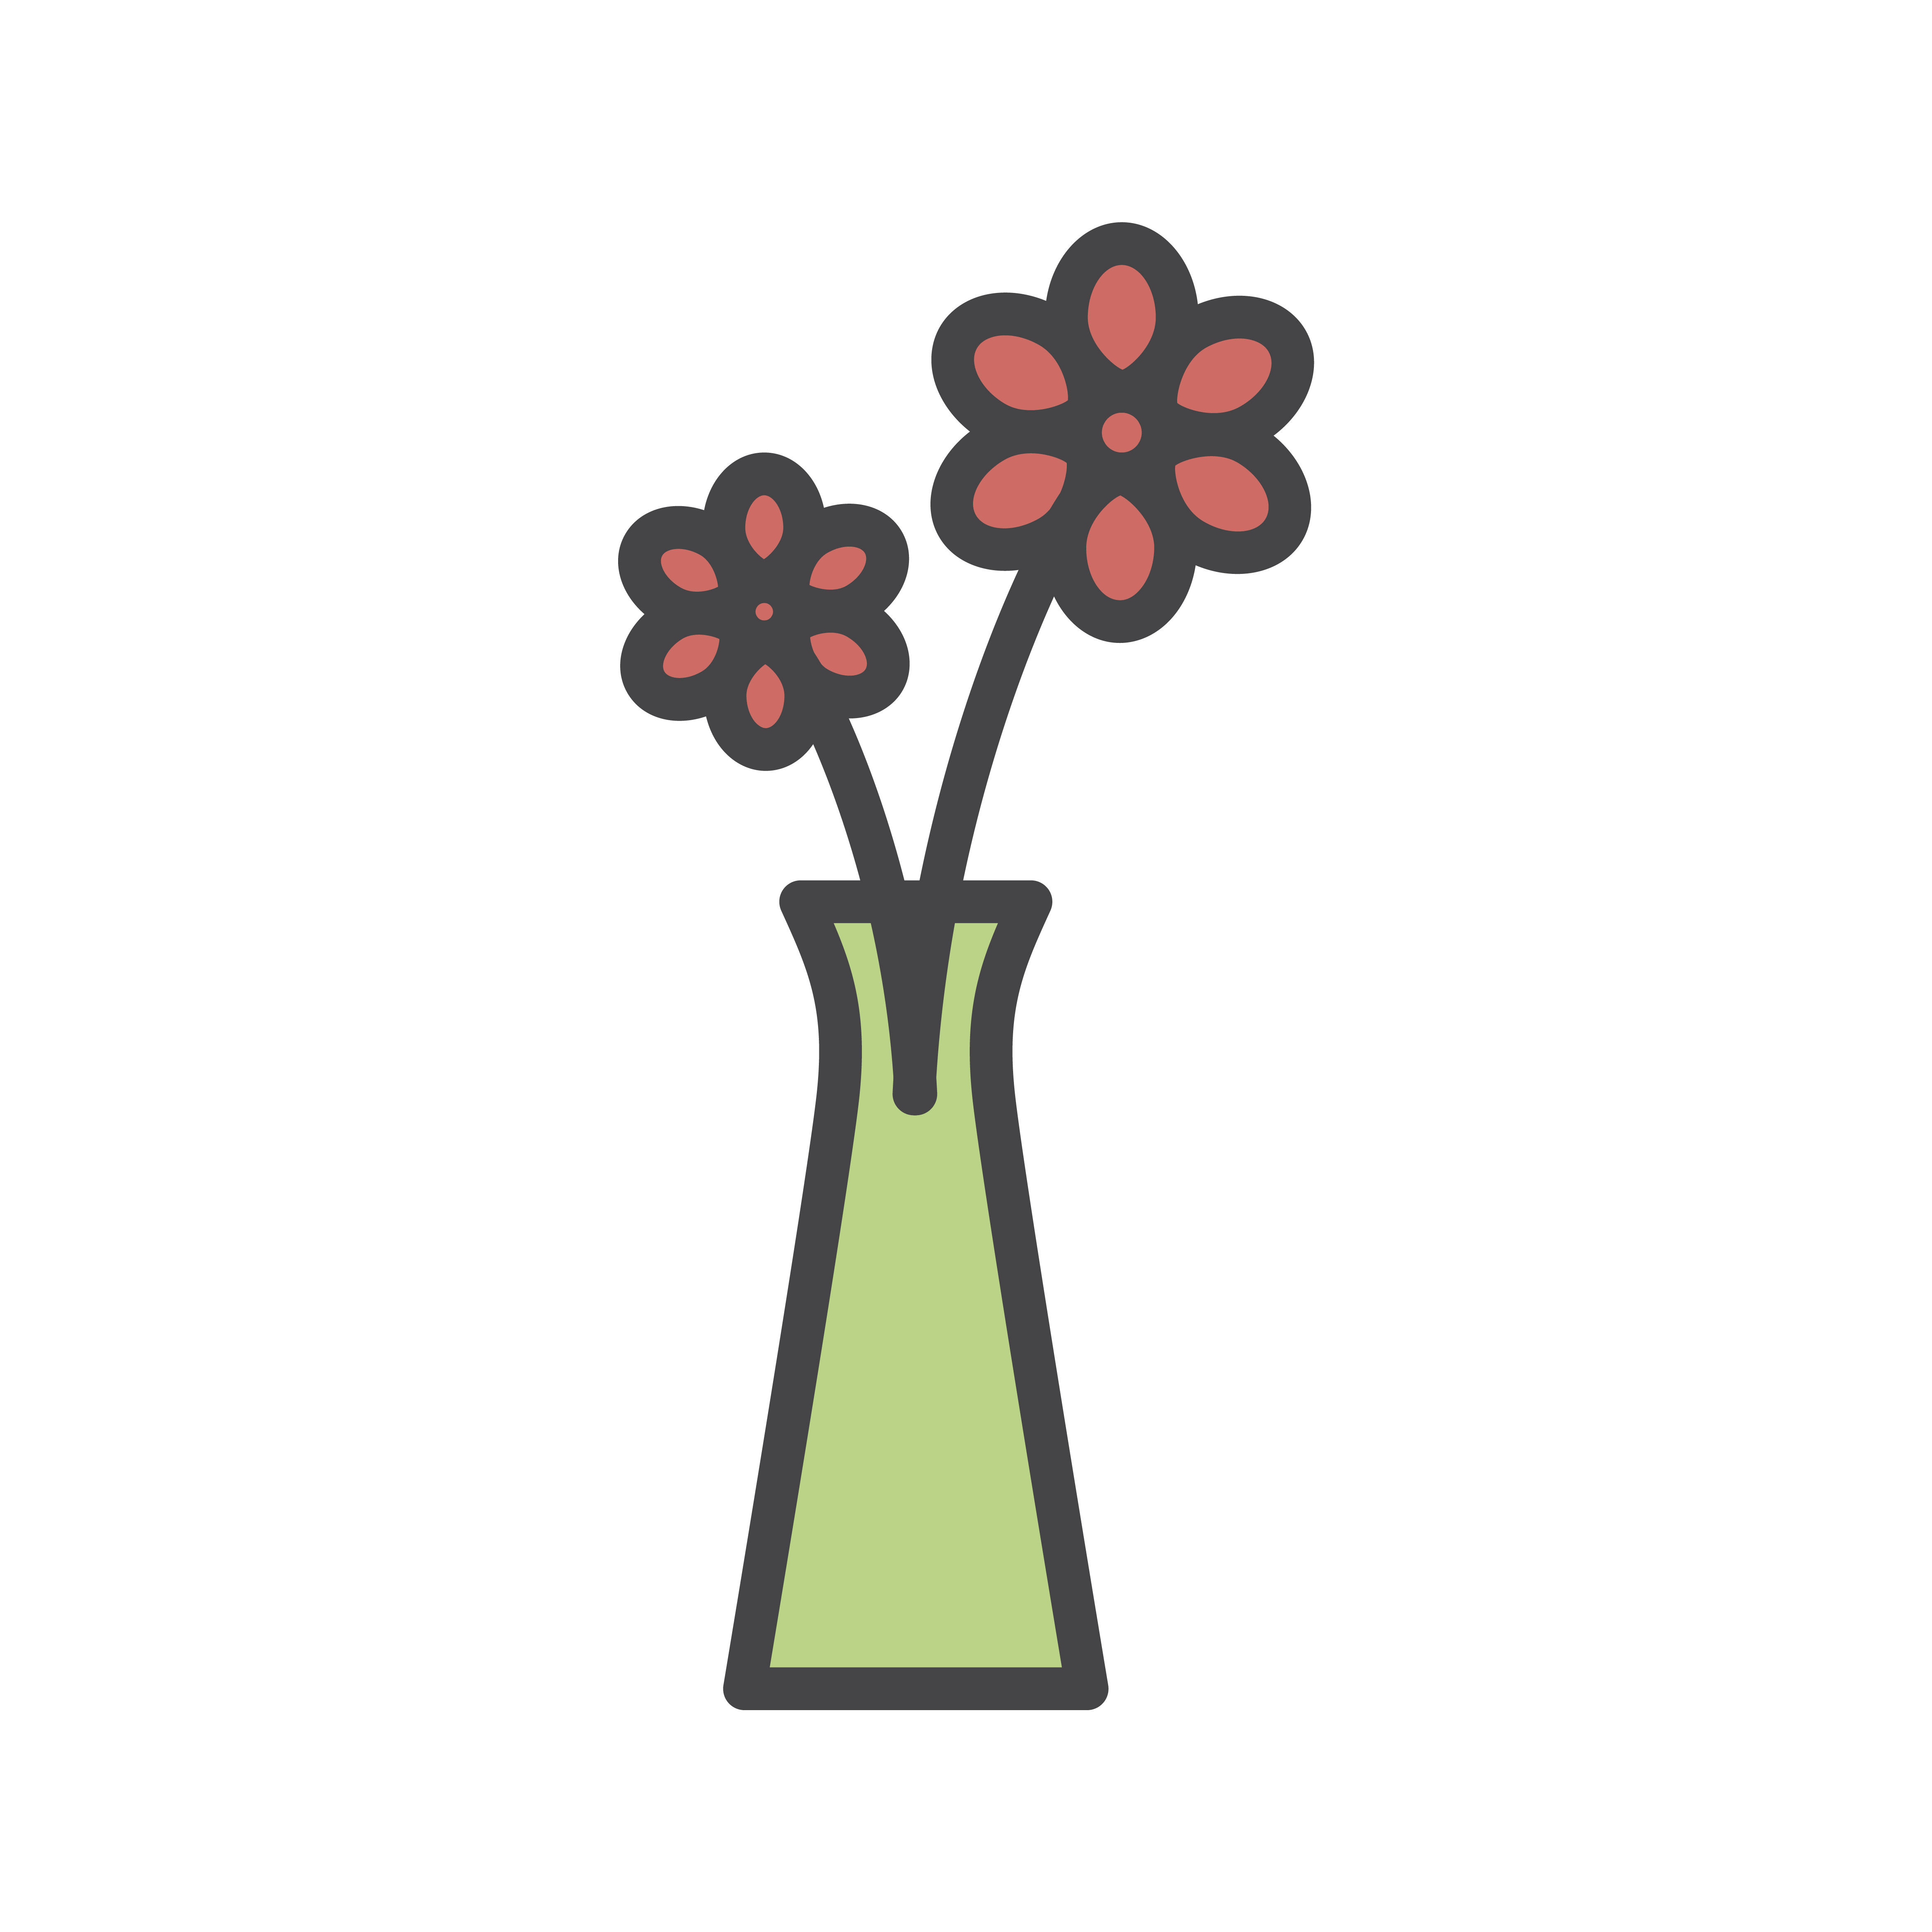 Download Vase Icon Free Vector Art - (62925 Free Downloads)